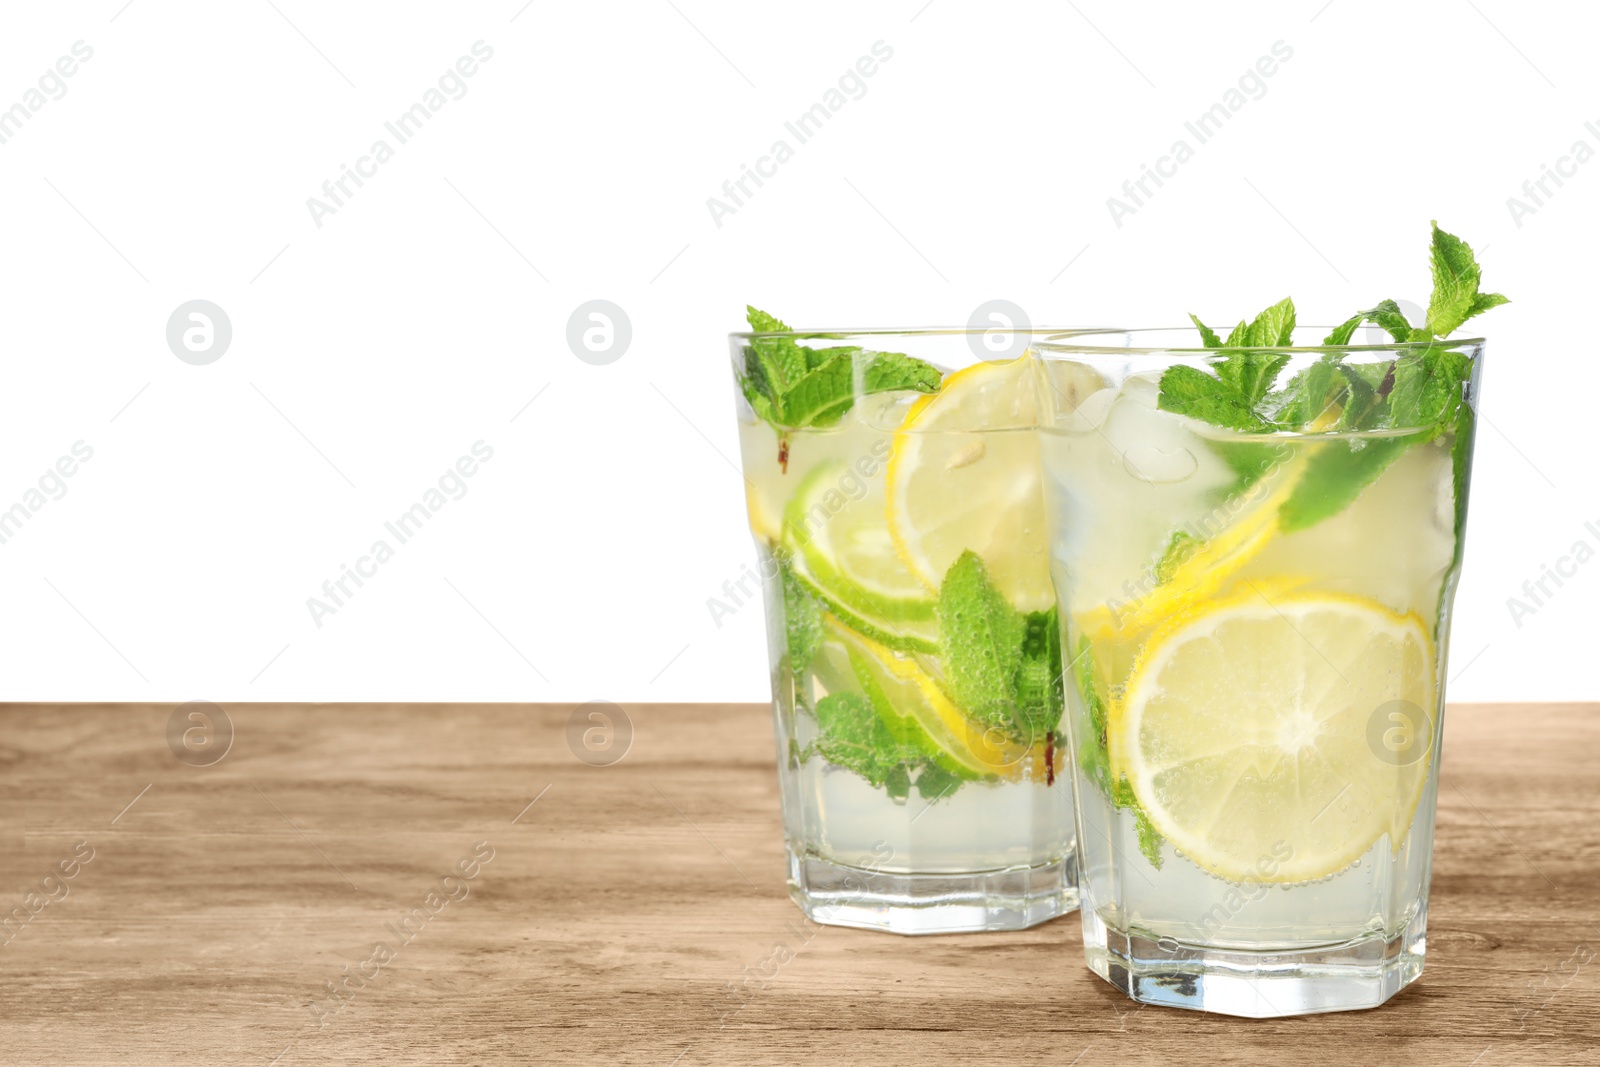 Photo of Glasses of refreshing drink with citrus slices and mint on wooden table against white background